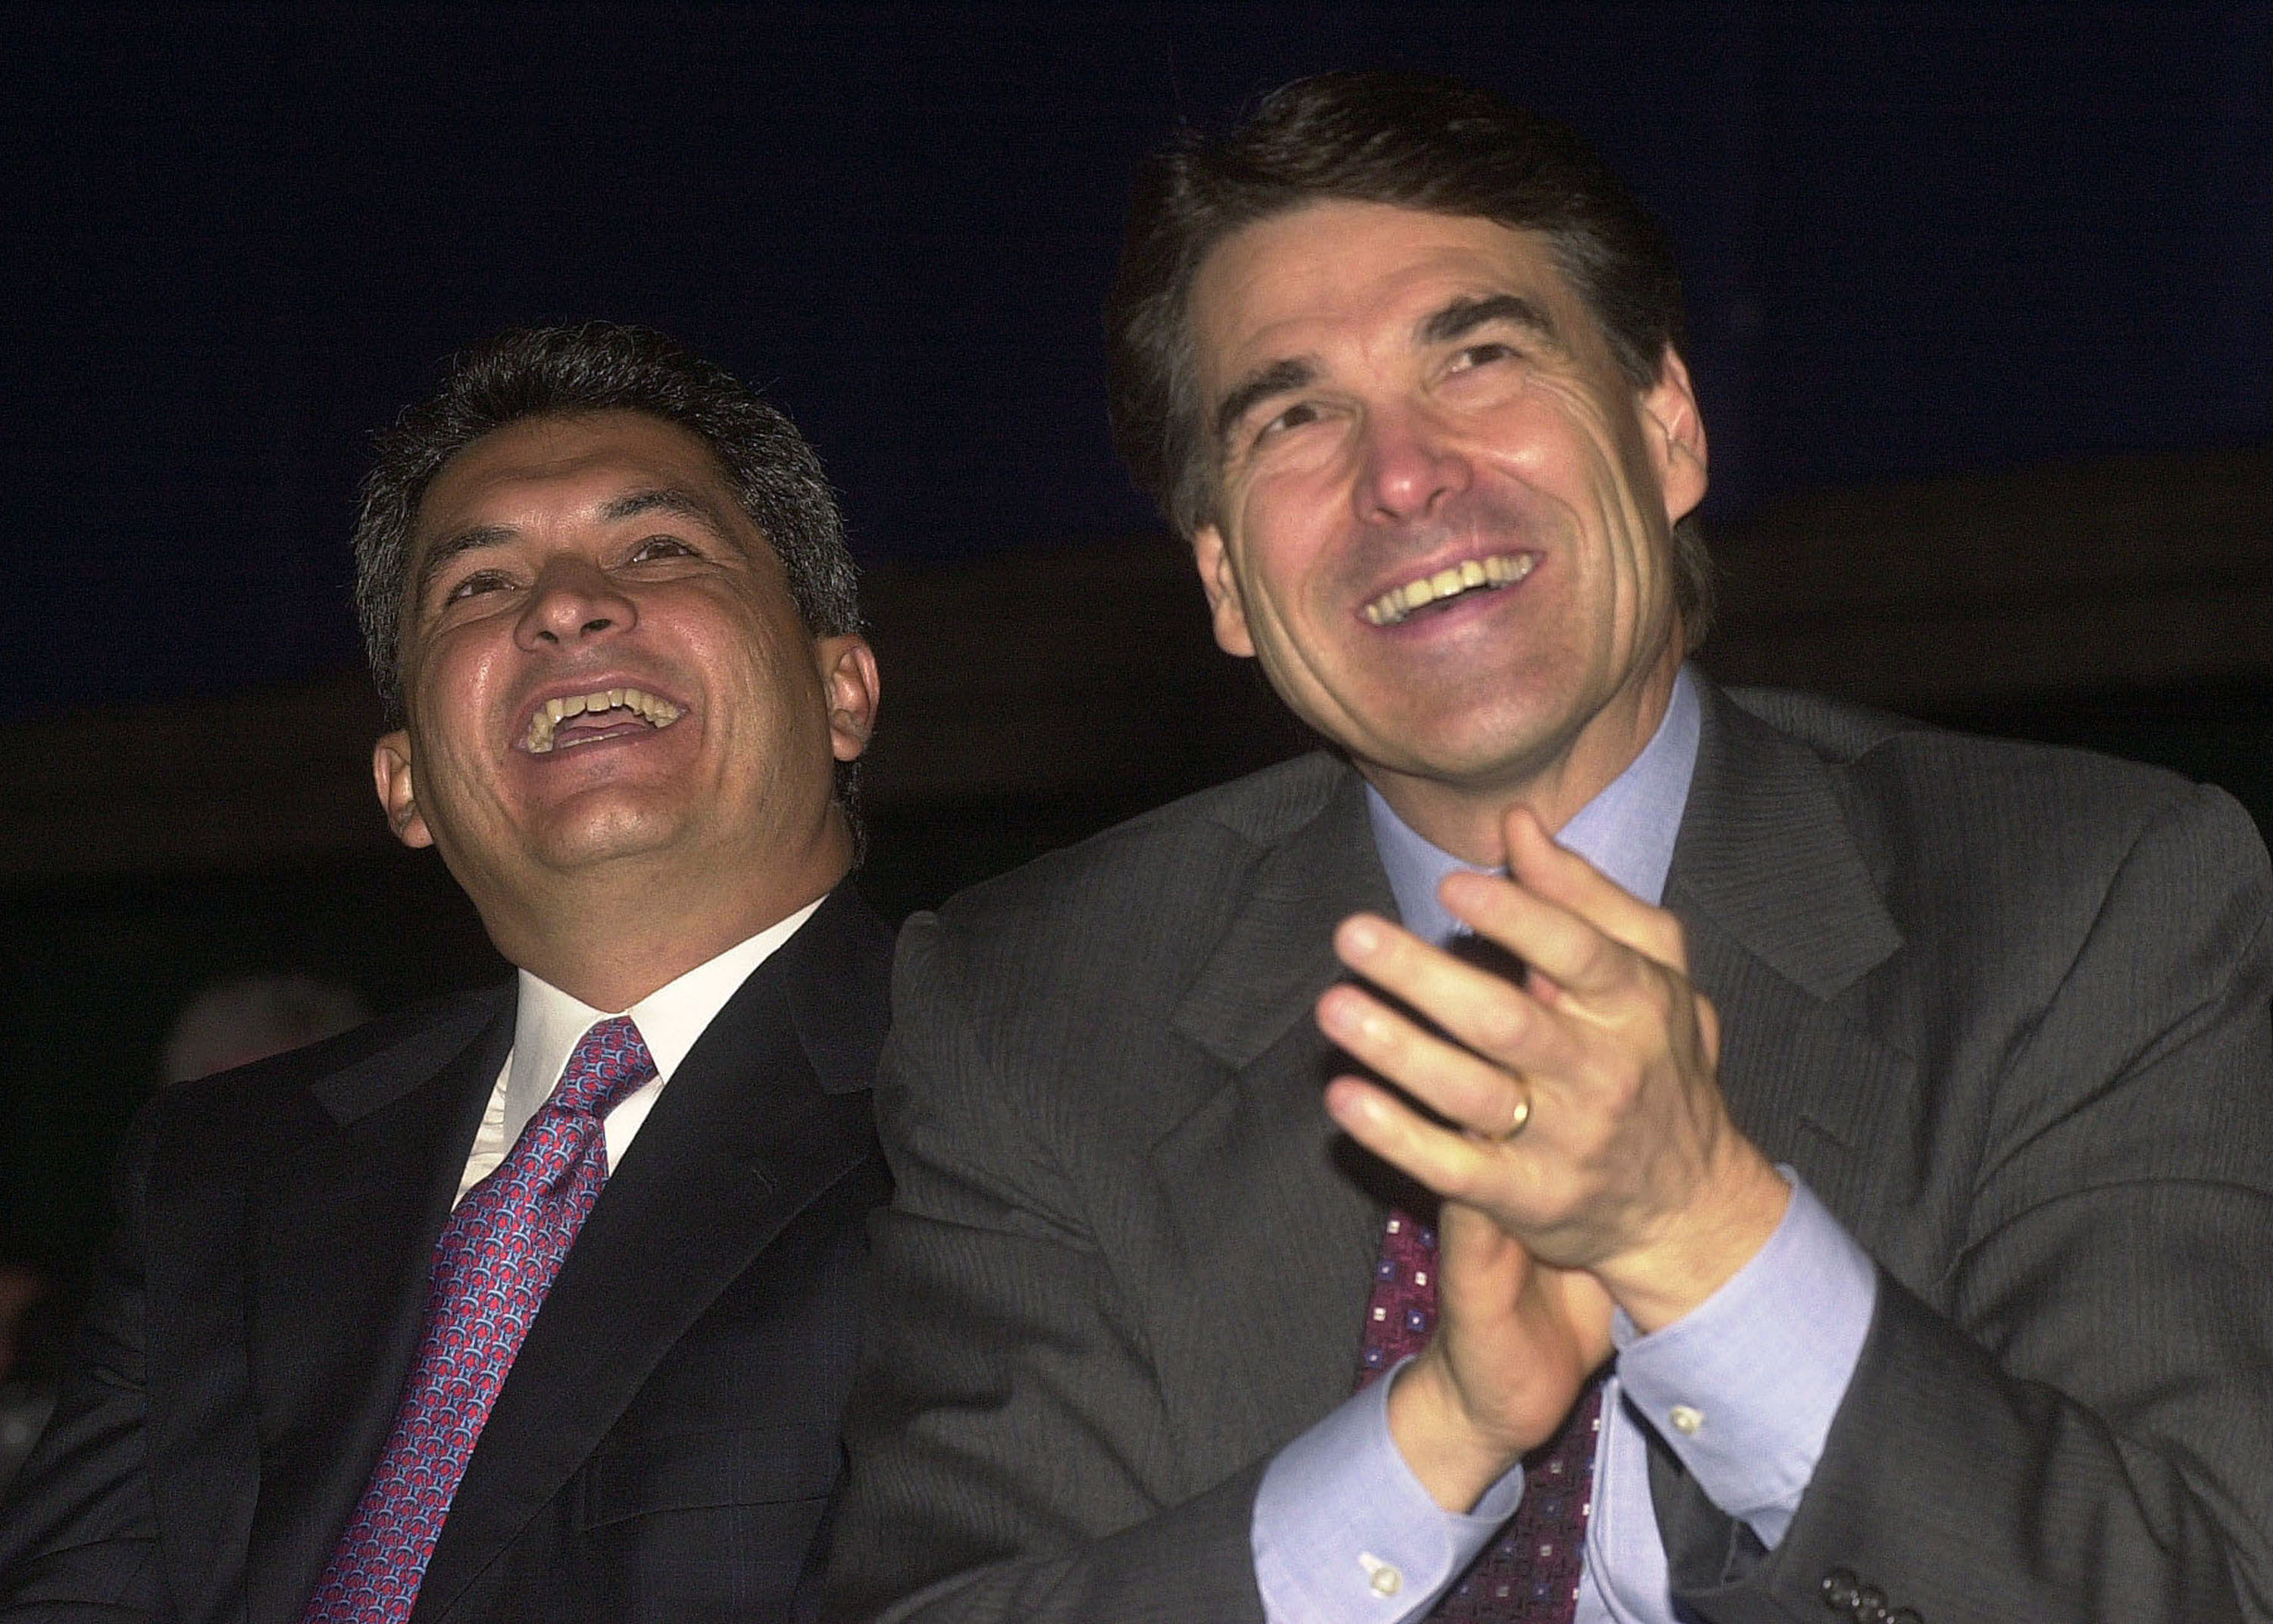 Governor Tomas Yarrington (L) of the state of Tamaulipas, Mexico, and Texas Governor Rick Perry listen to remarks during the U.S. and Mexico Border Summit August, 22, 2001 in Edinburg, TX. (Photo by Alicia Wagner Calzada/Getty Images)